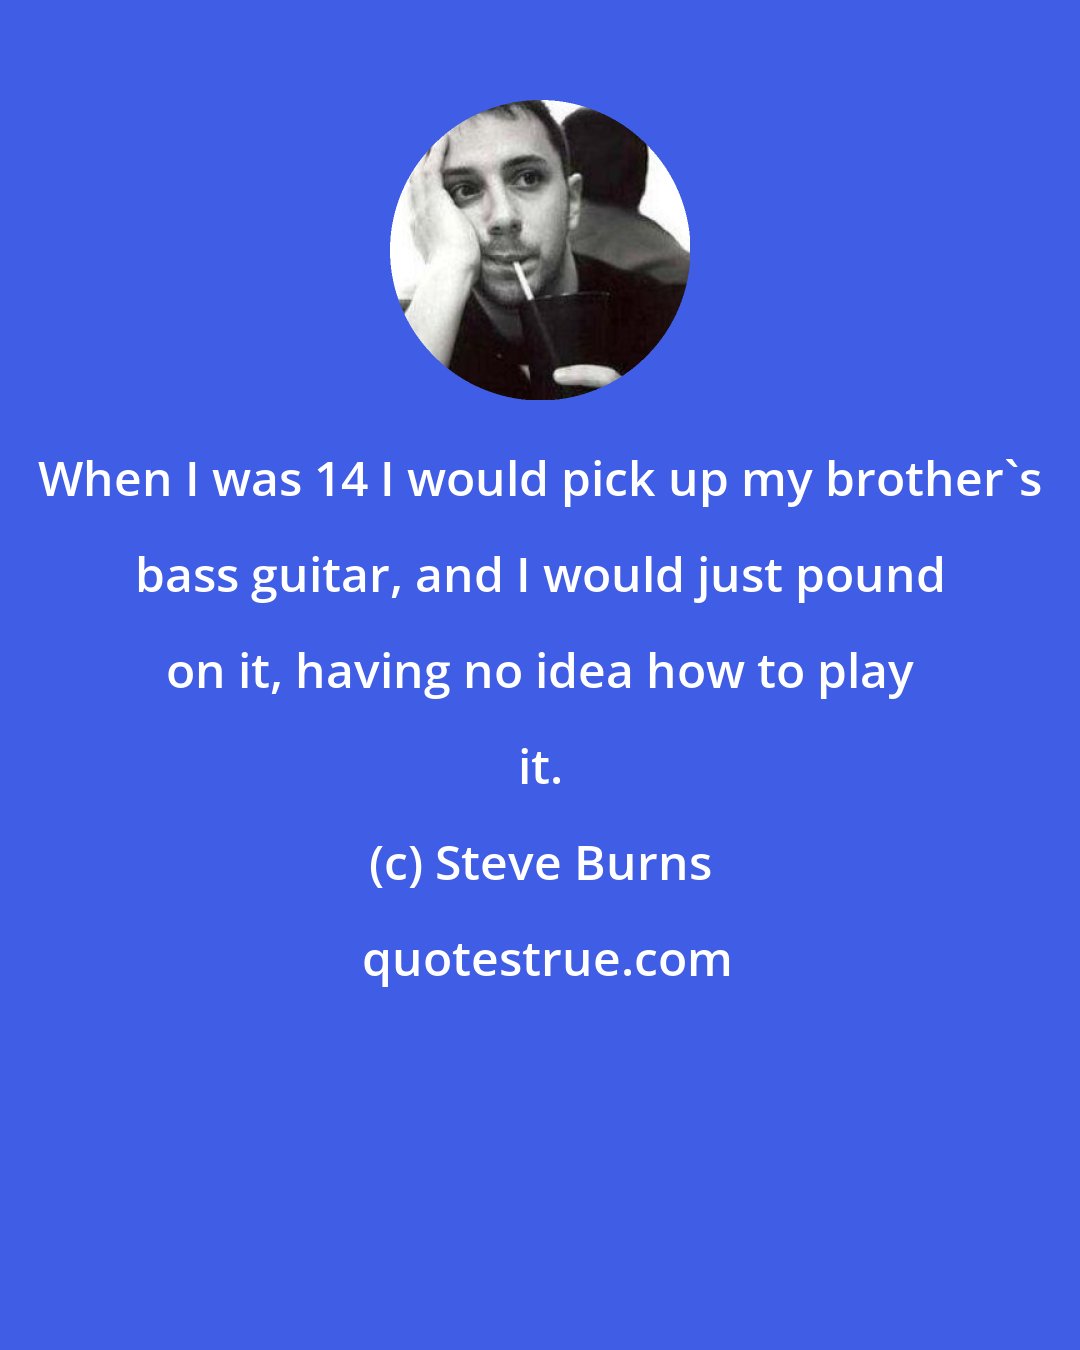 Steve Burns: When I was 14 I would pick up my brother's bass guitar, and I would just pound on it, having no idea how to play it.